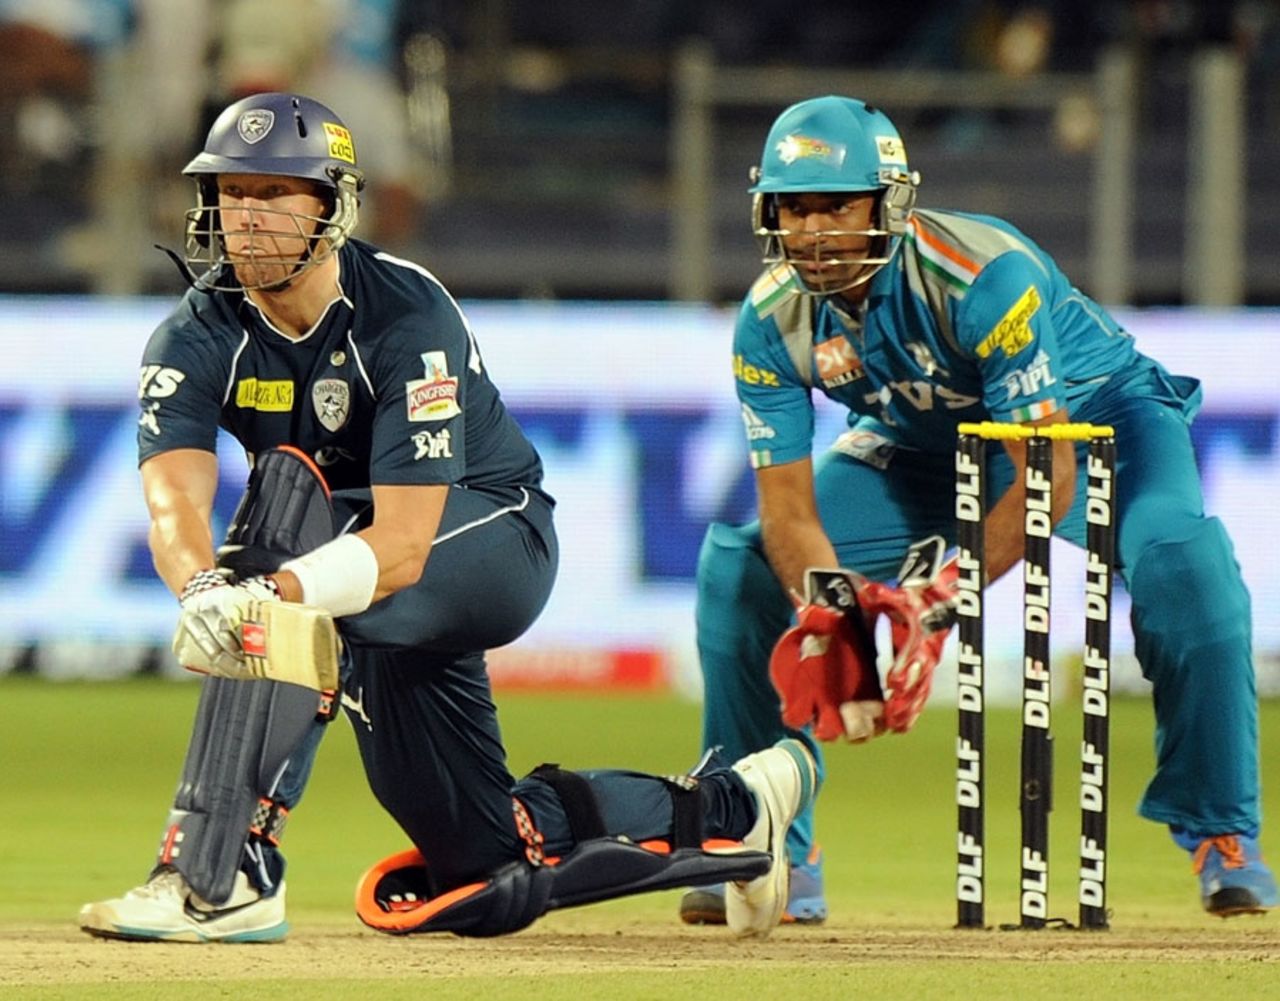 Cameron White prepares to sweep, Pune Warriors v Deccan Chargers, IPL, Pune, April 26, 2012